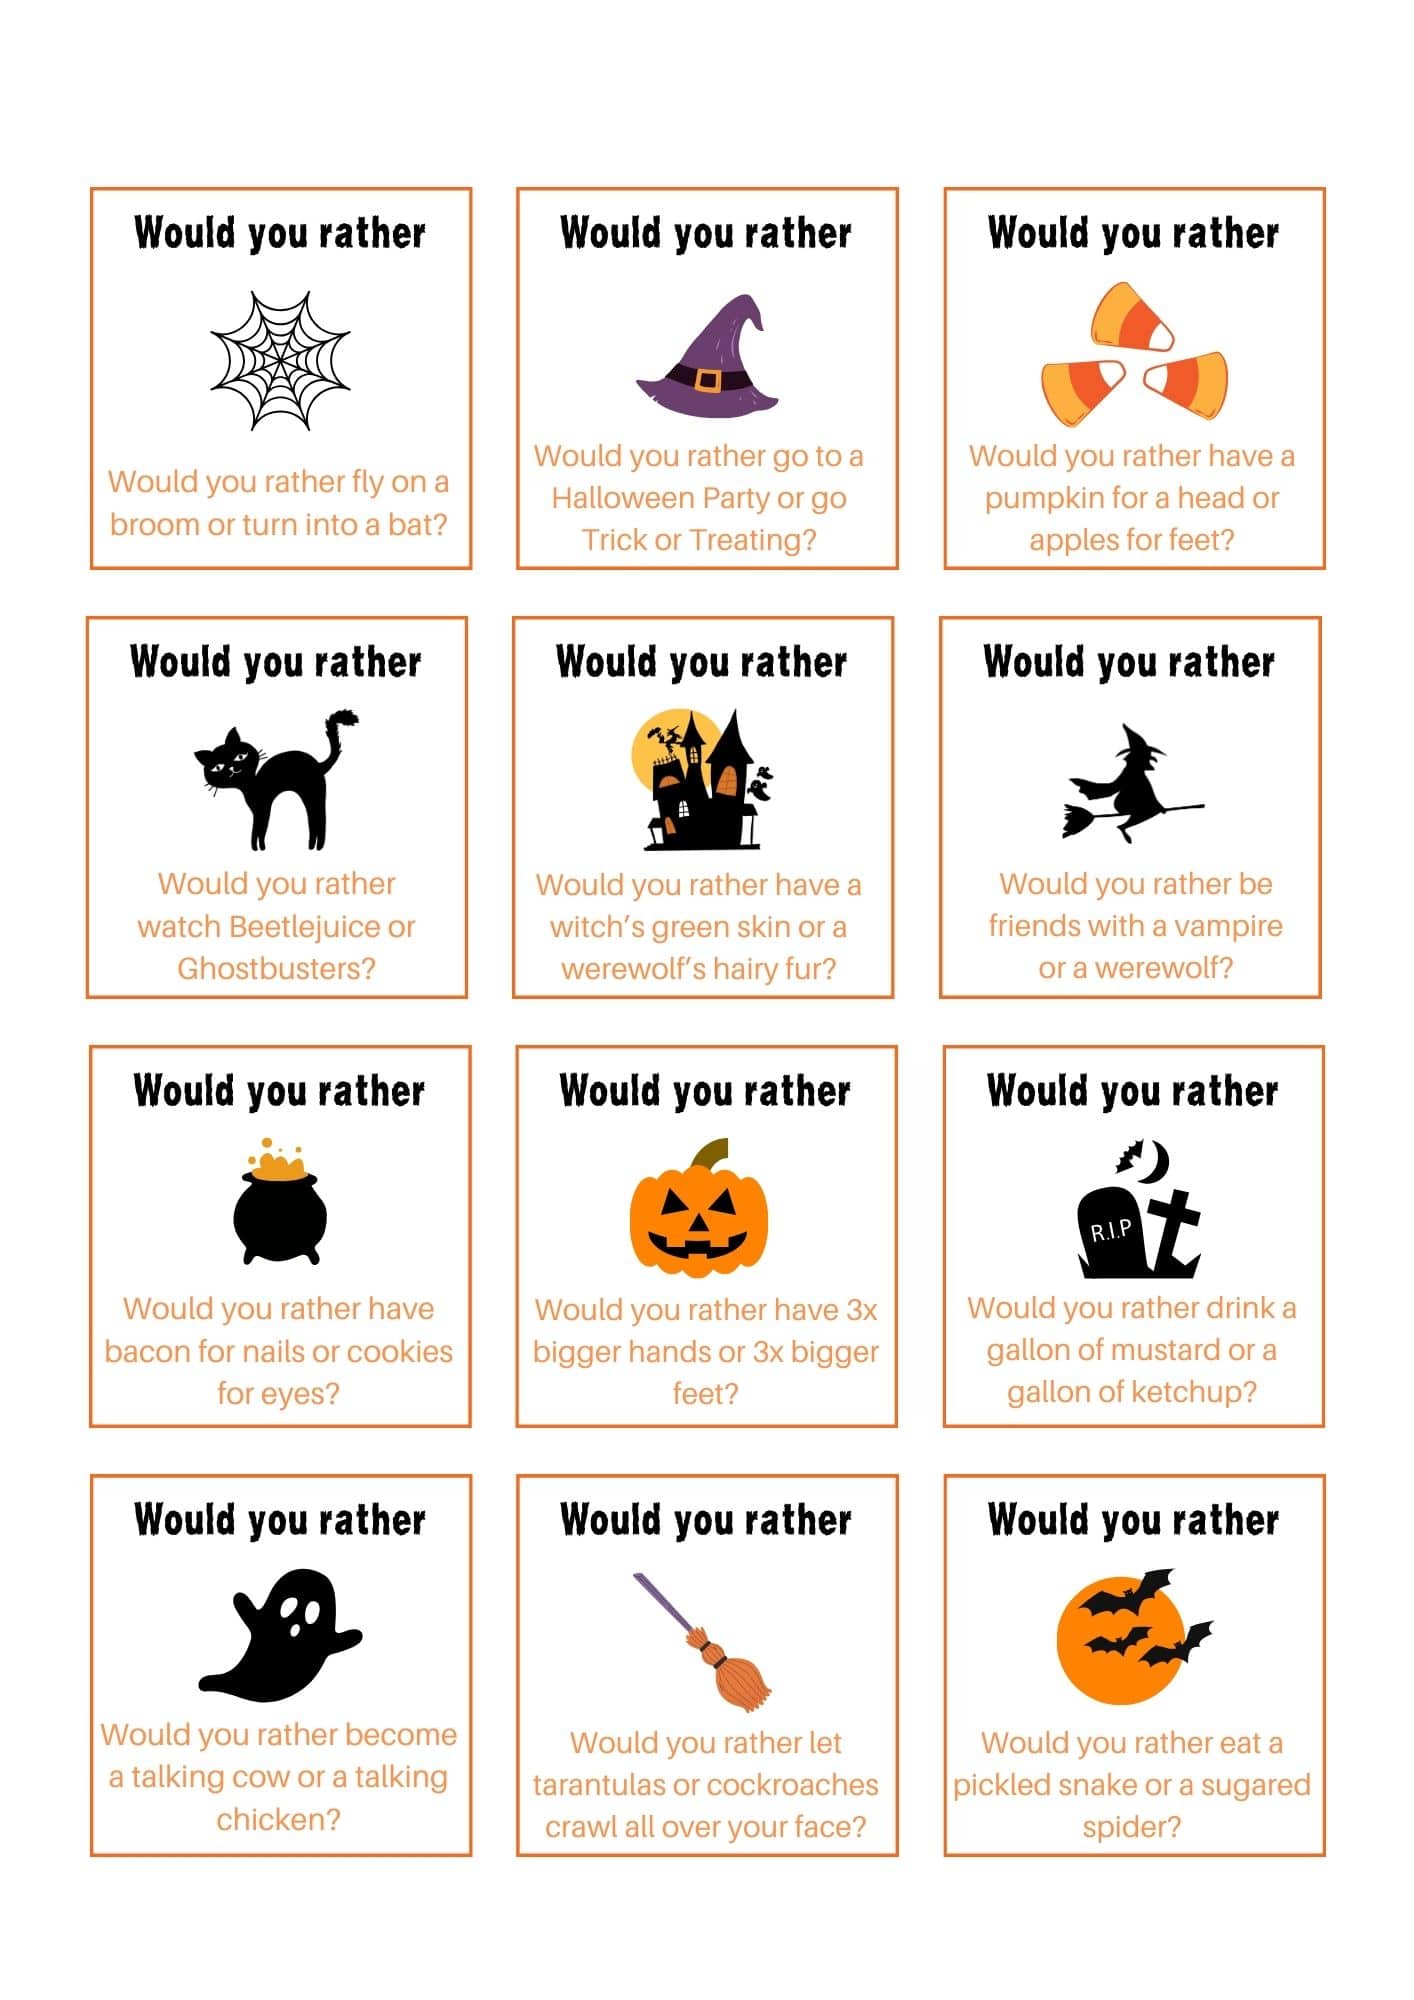 Halloween would you rather questions printable card.